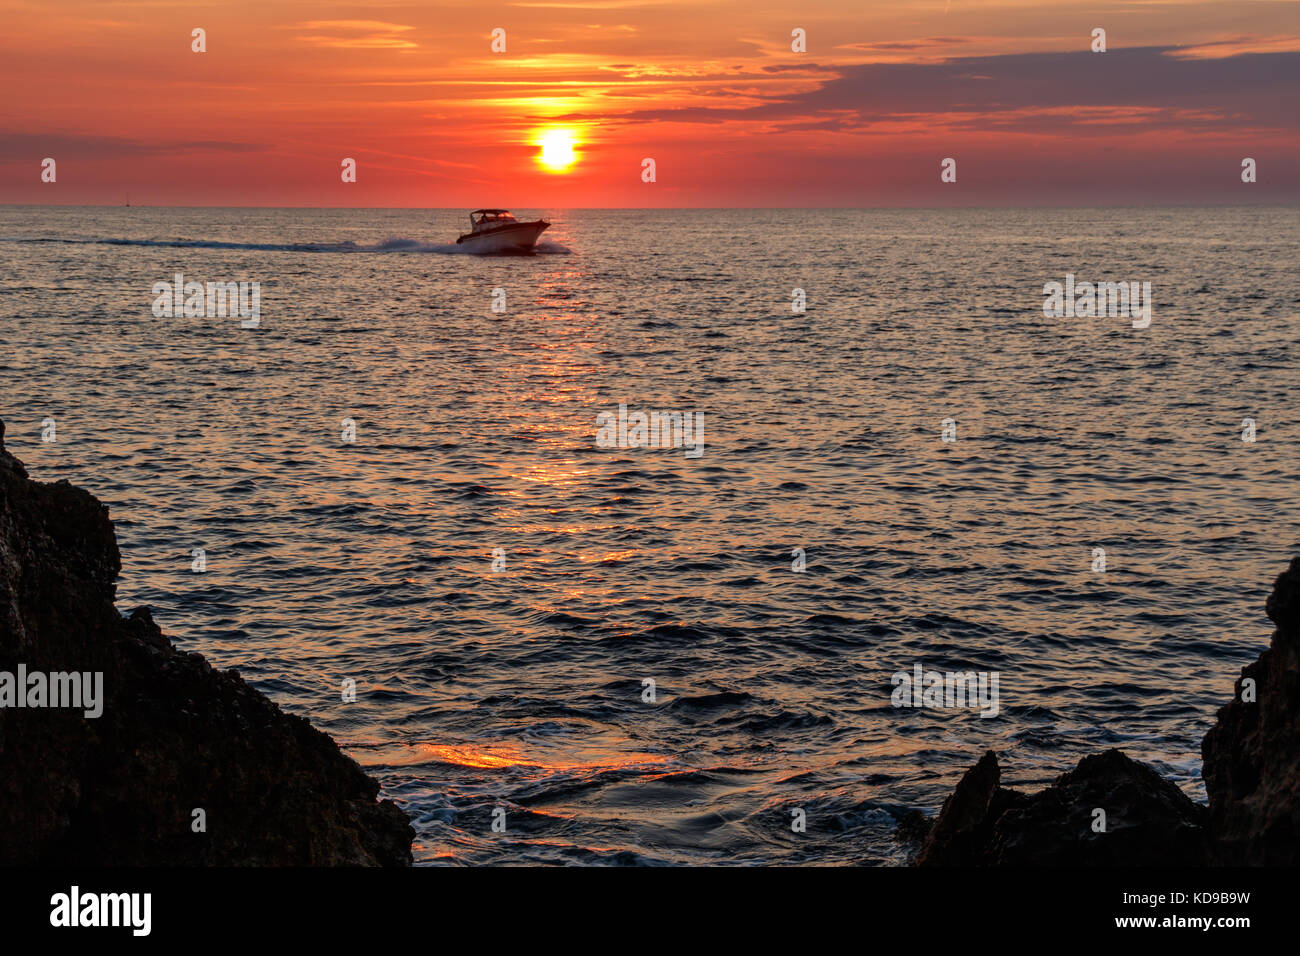 A speedboat is homeward bound as the sunsets over Punta del Capo Sorrento, Italy. Stock Photo